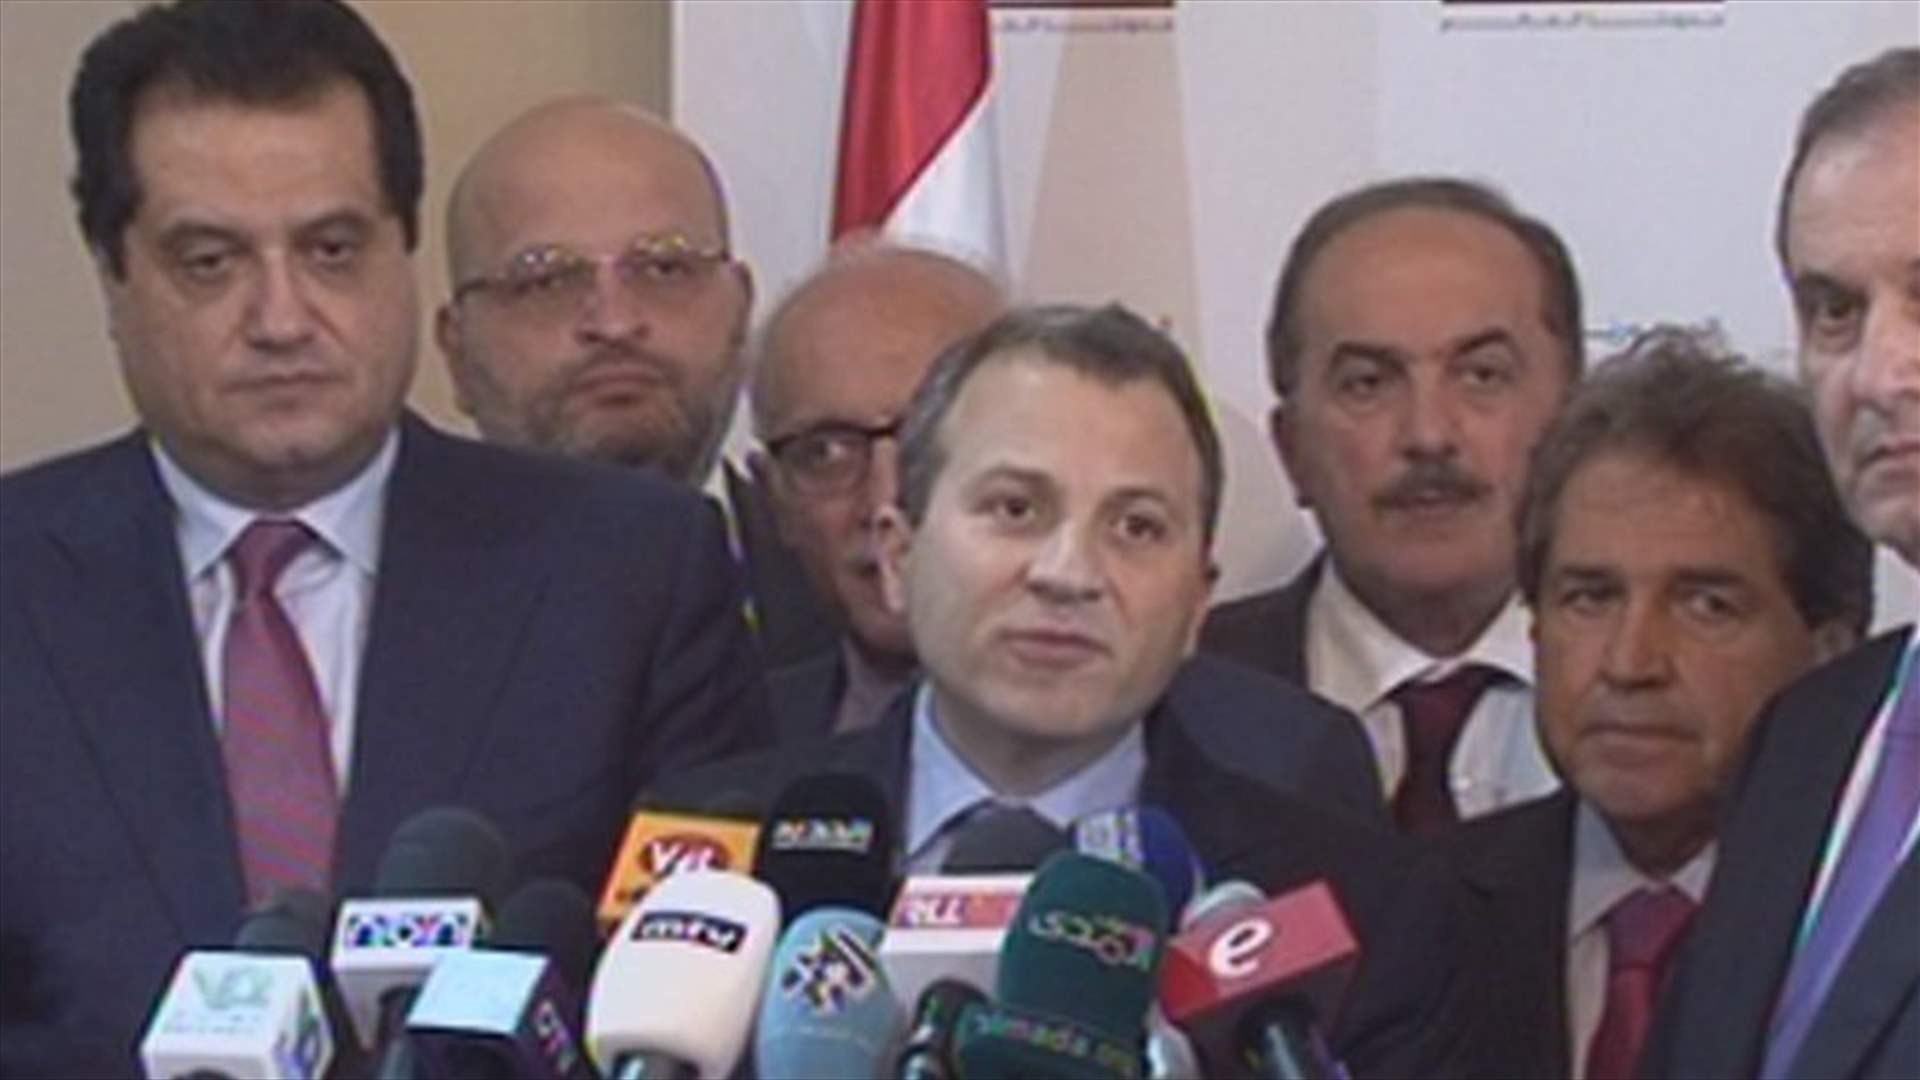 FM Bassil stresses Lebanon’s keenness on maintaining relations with Arab states